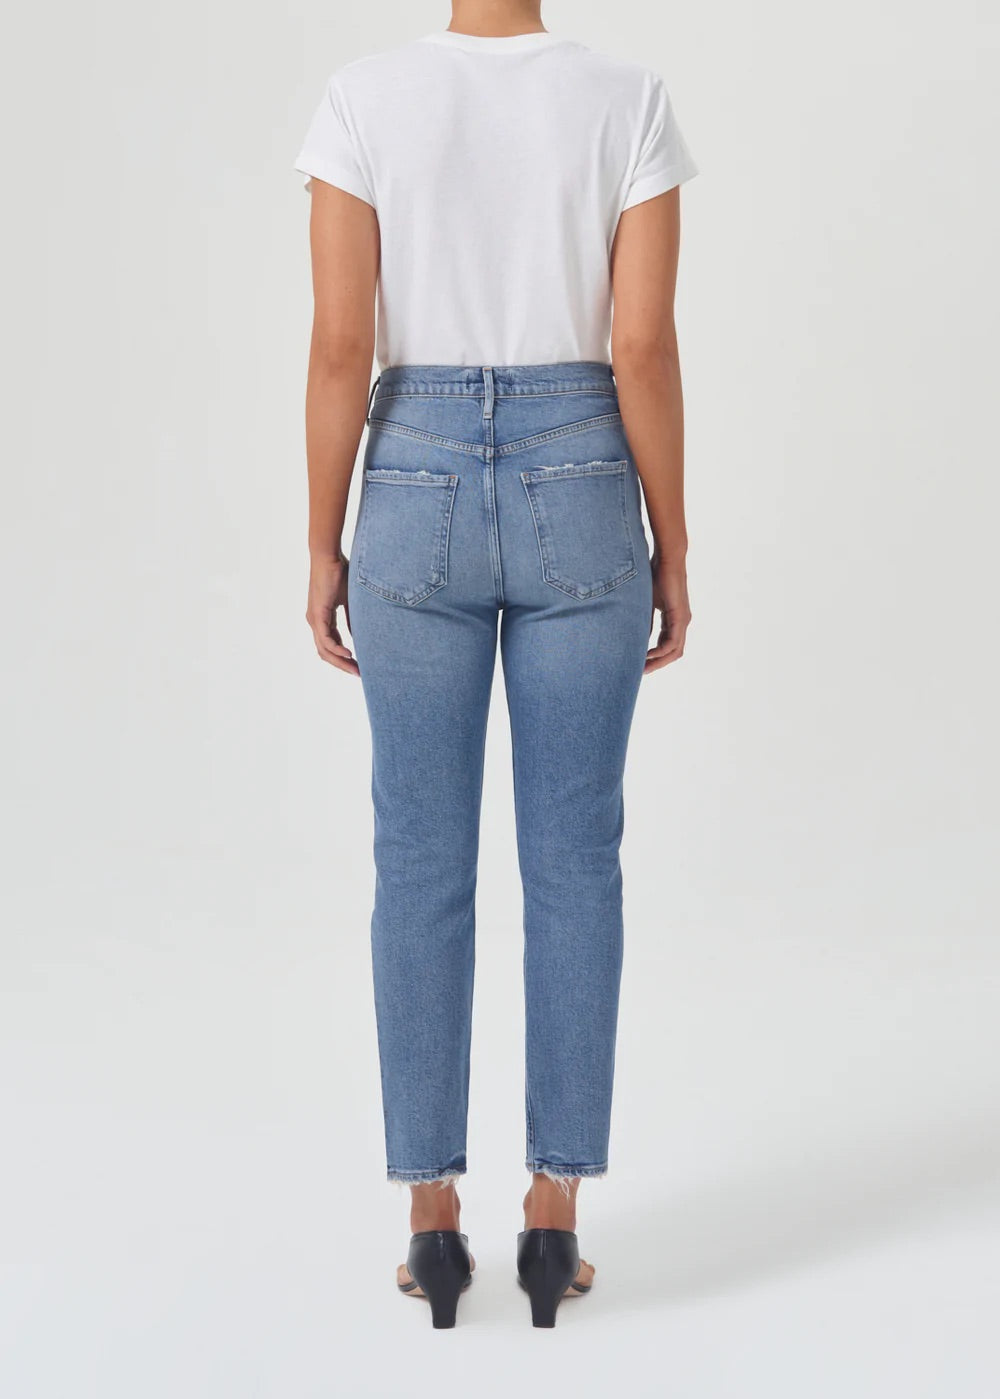 The back view of a woman wearing an AGOLDE Riley Straight Crop - Cove white t-shirt and straight leg jeans.